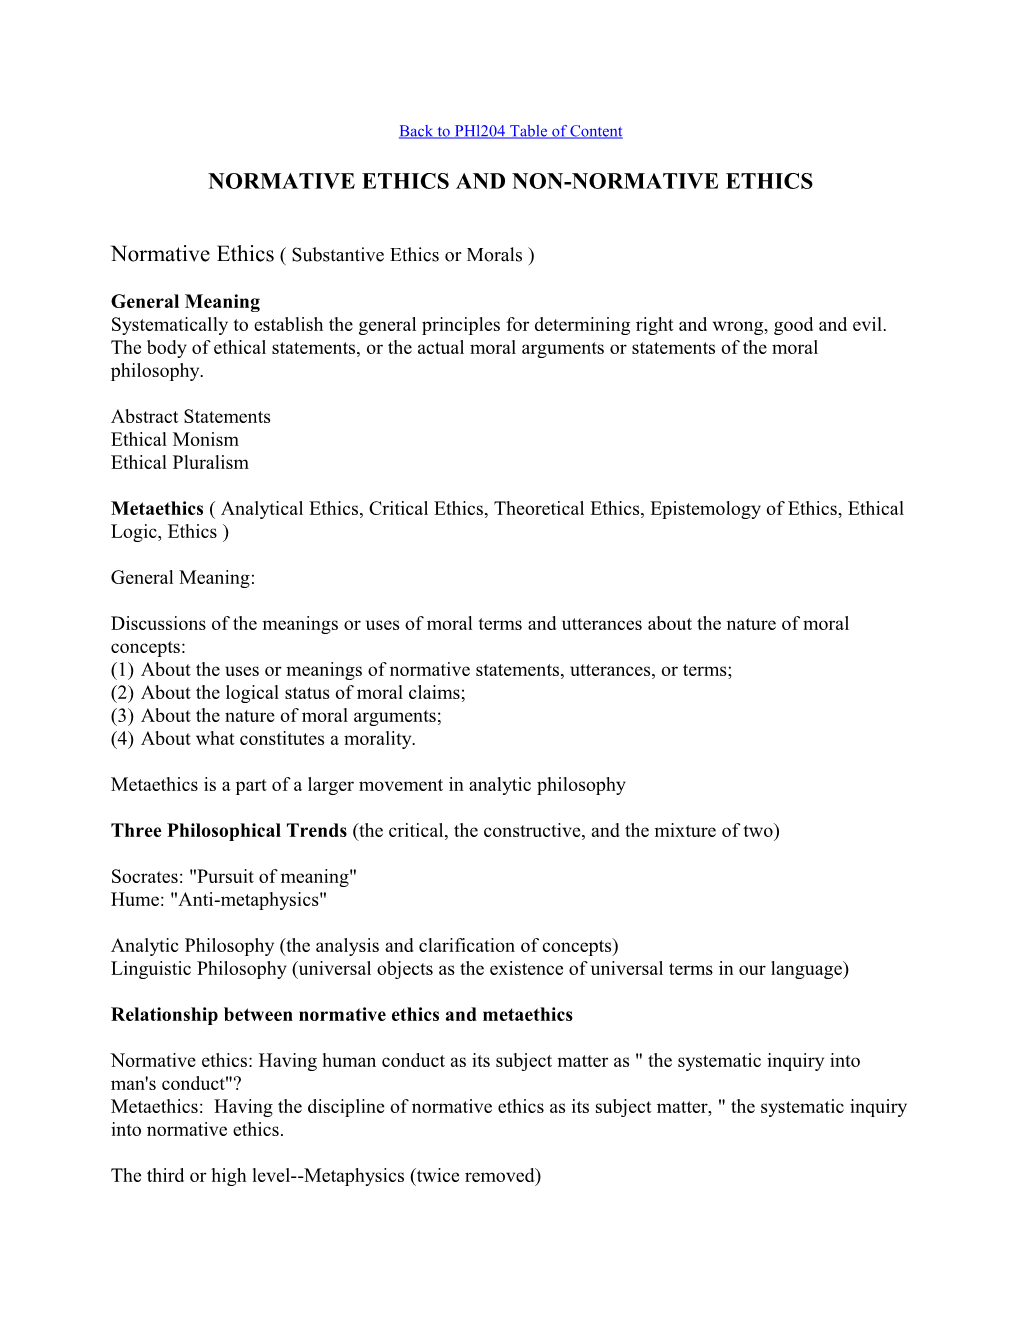 Normative Ethics and Non Ormative Ethics